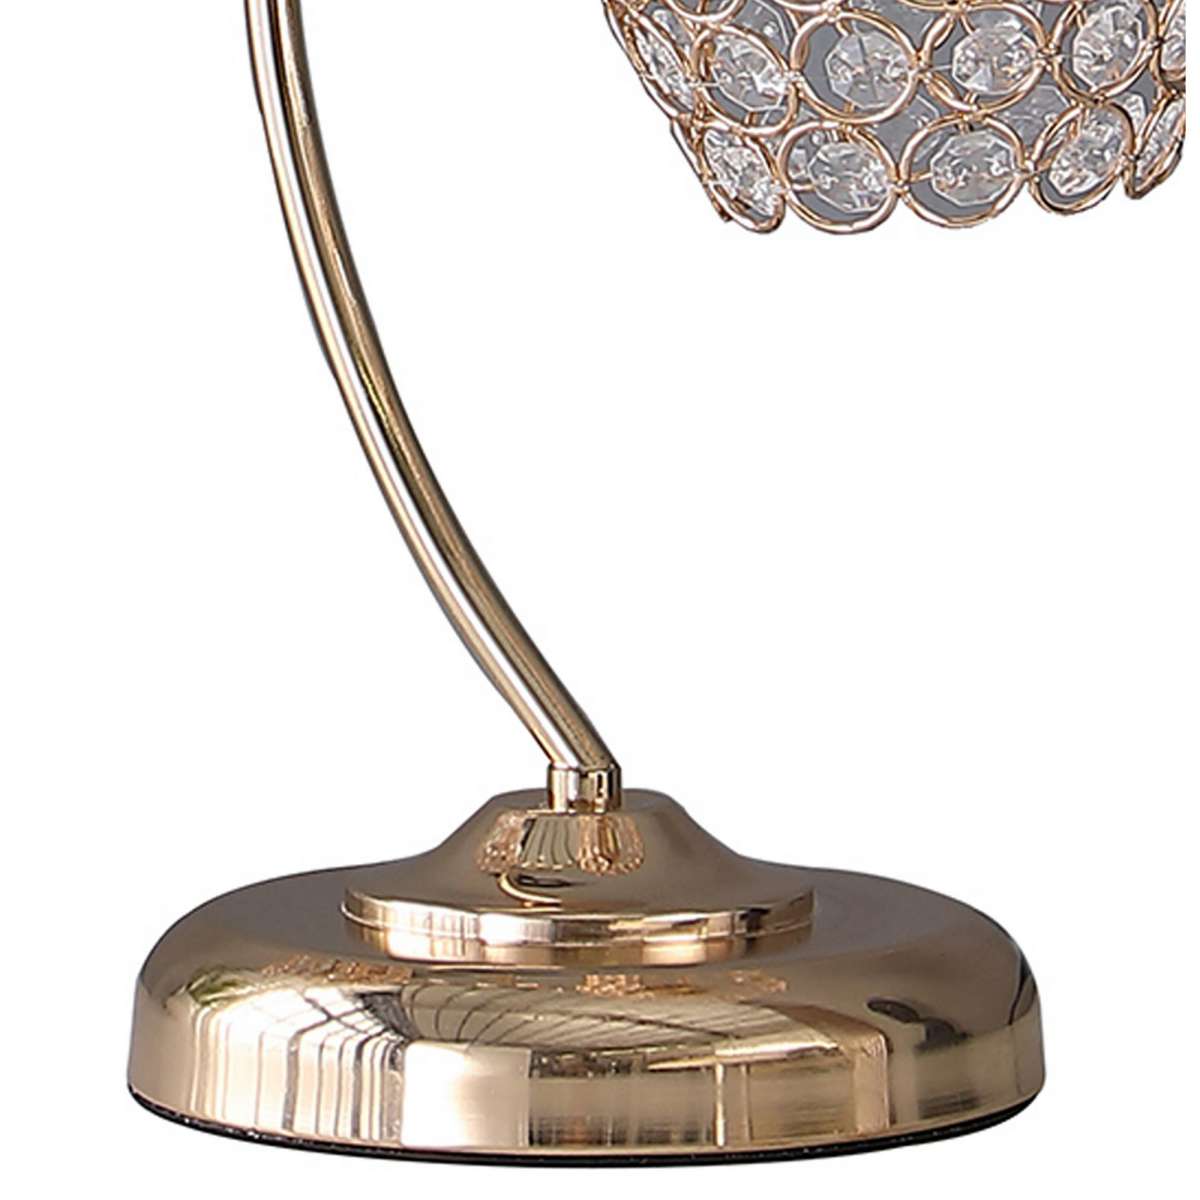 Floral Tree Design Metal Table Lamp With Dome Shade And Crystals, Gold By Benzara